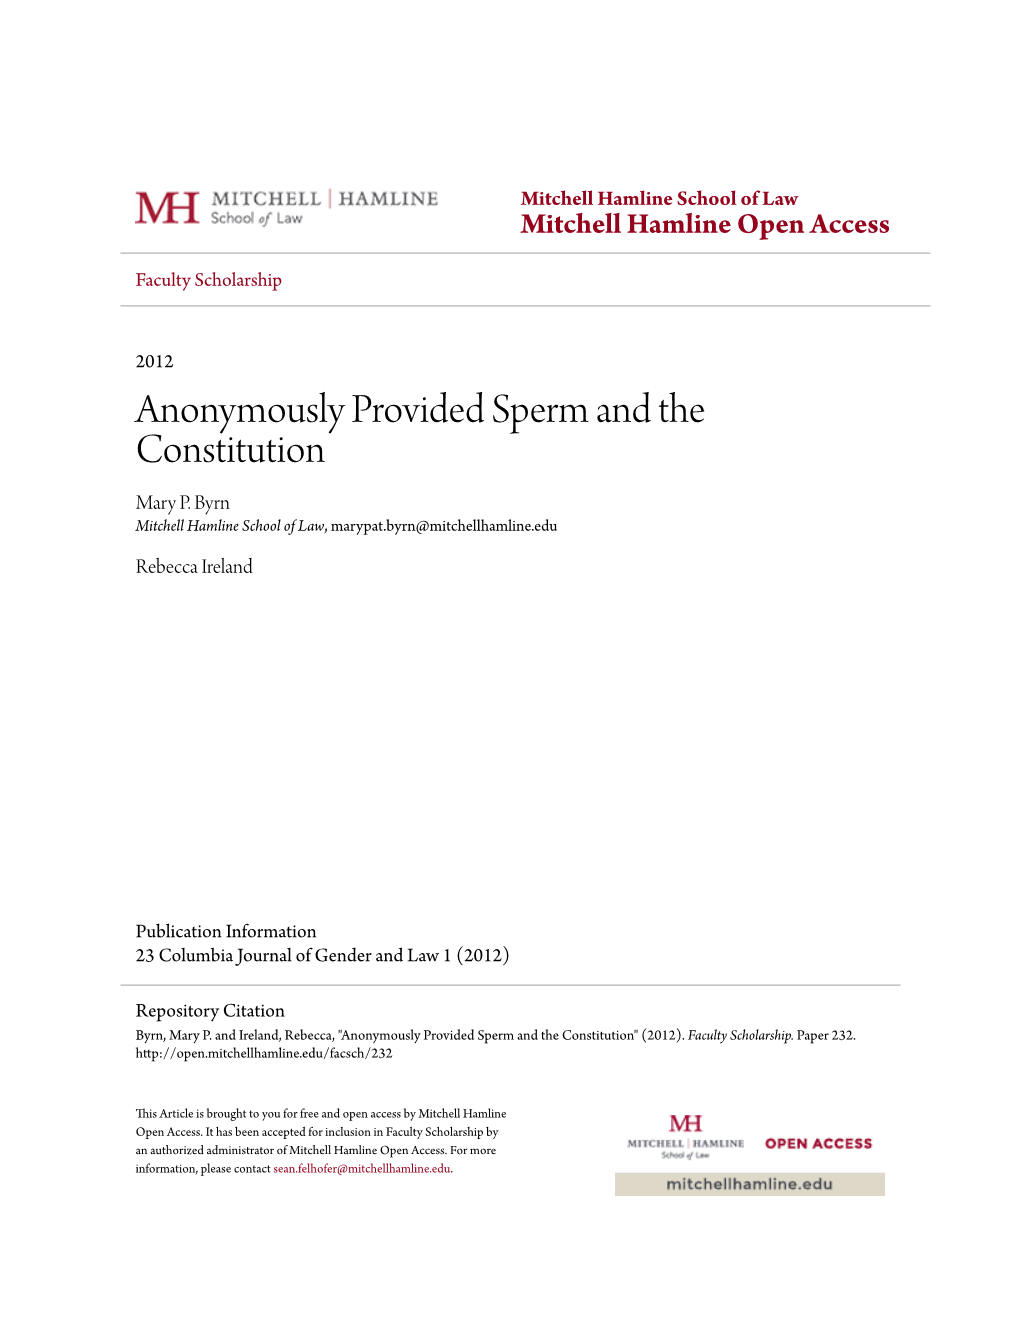 Anonymously Provided Sperm and the Constitution Mary P